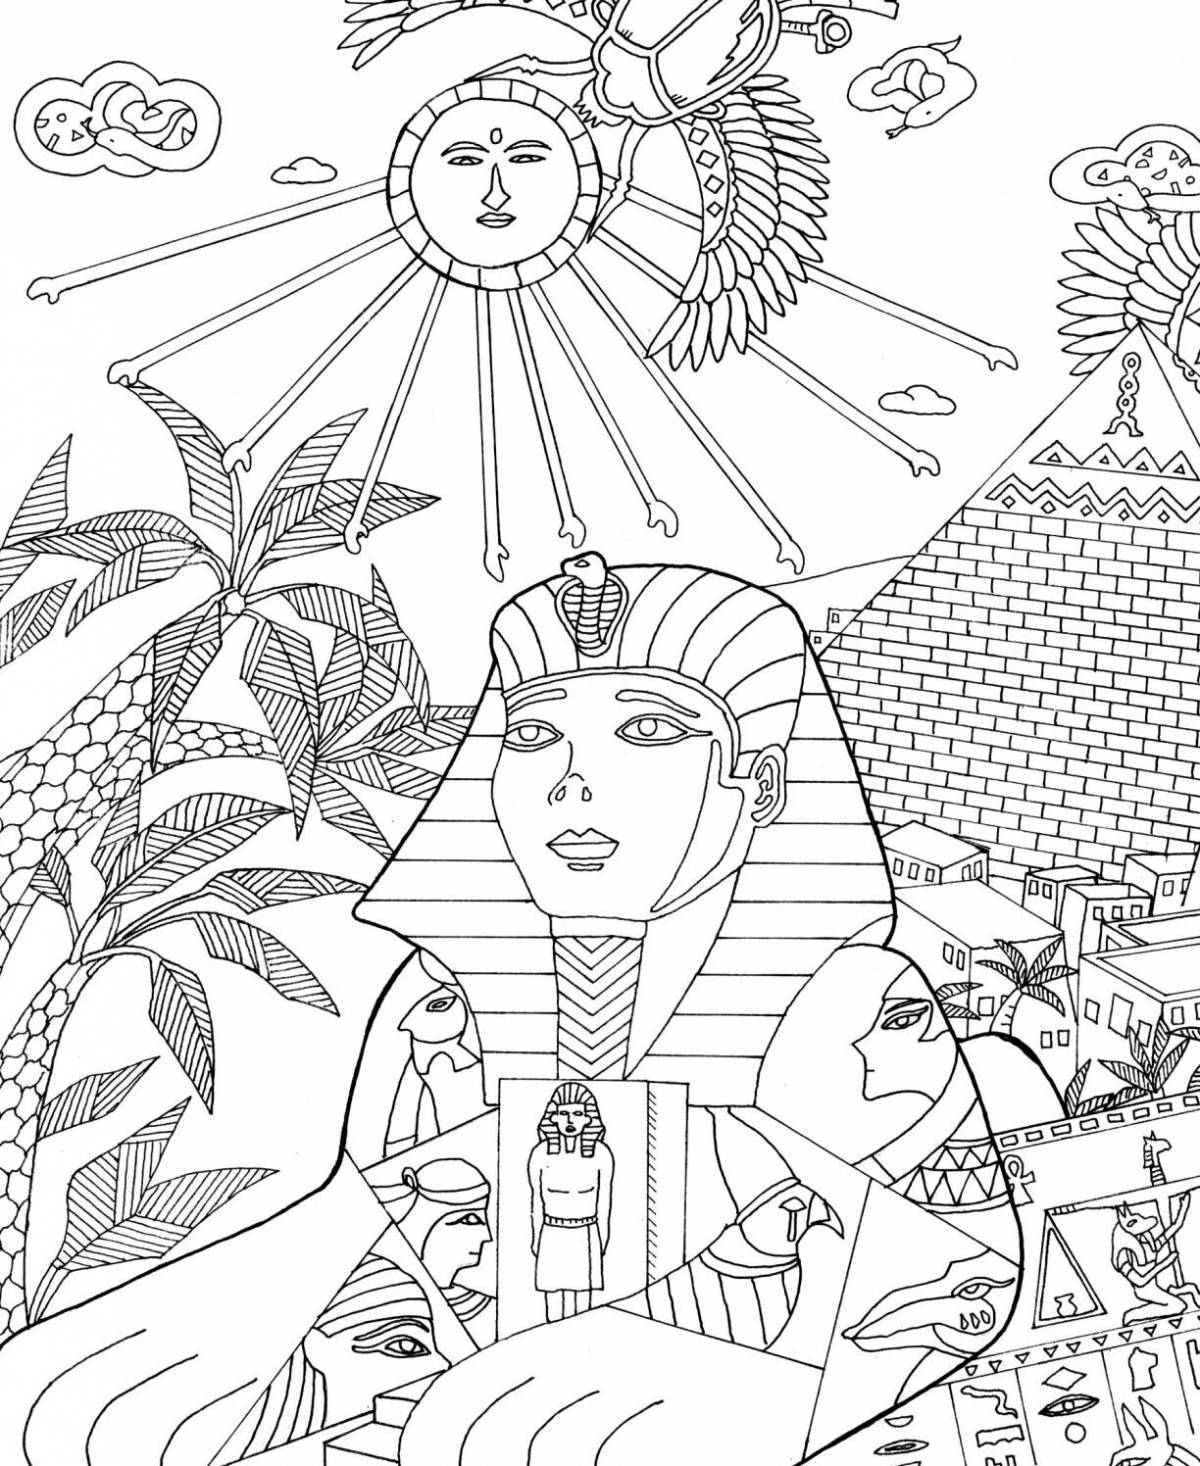 Beautiful ancient egypt coloring book for kids